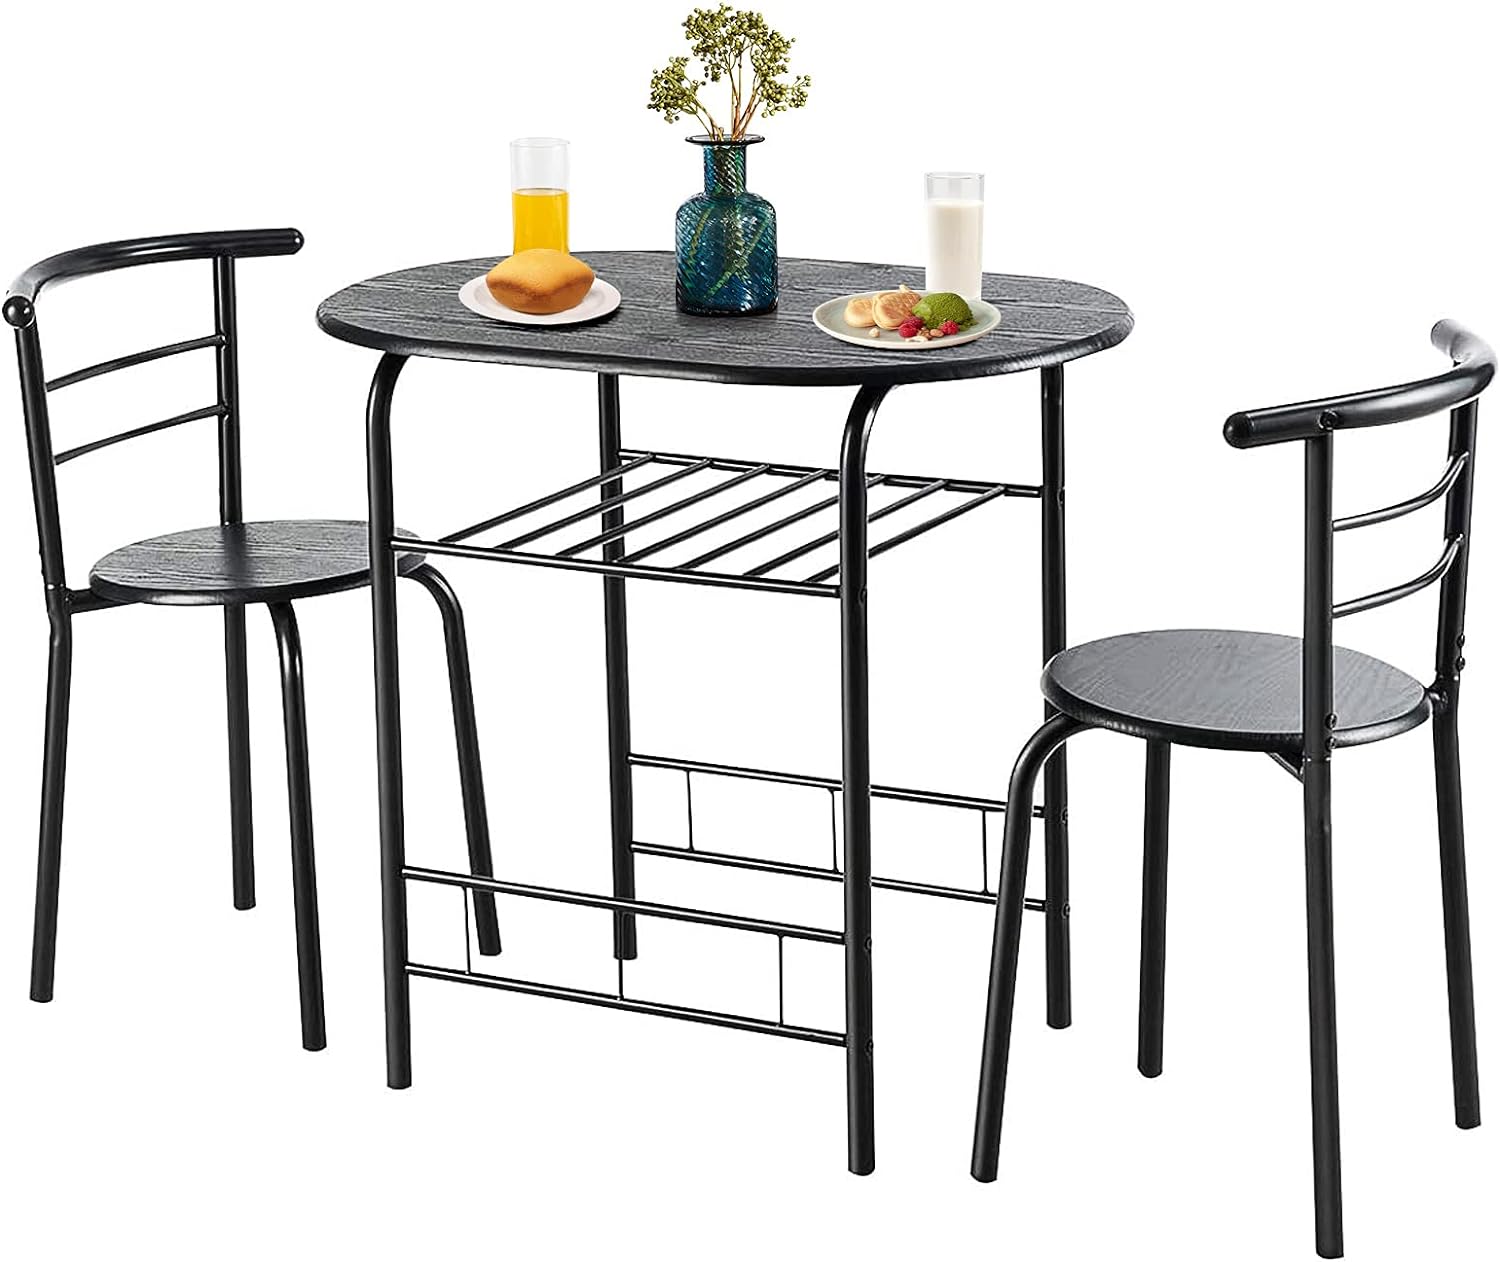 COSTWAY 3 Piece Dining Table Set for 2, Modern Round Table Set with 2 Stools, Pub Table and Chairs Dining Set with Built in Storage Layer, Space Saving for Kitchen, Apartment and Dining Room (Black)